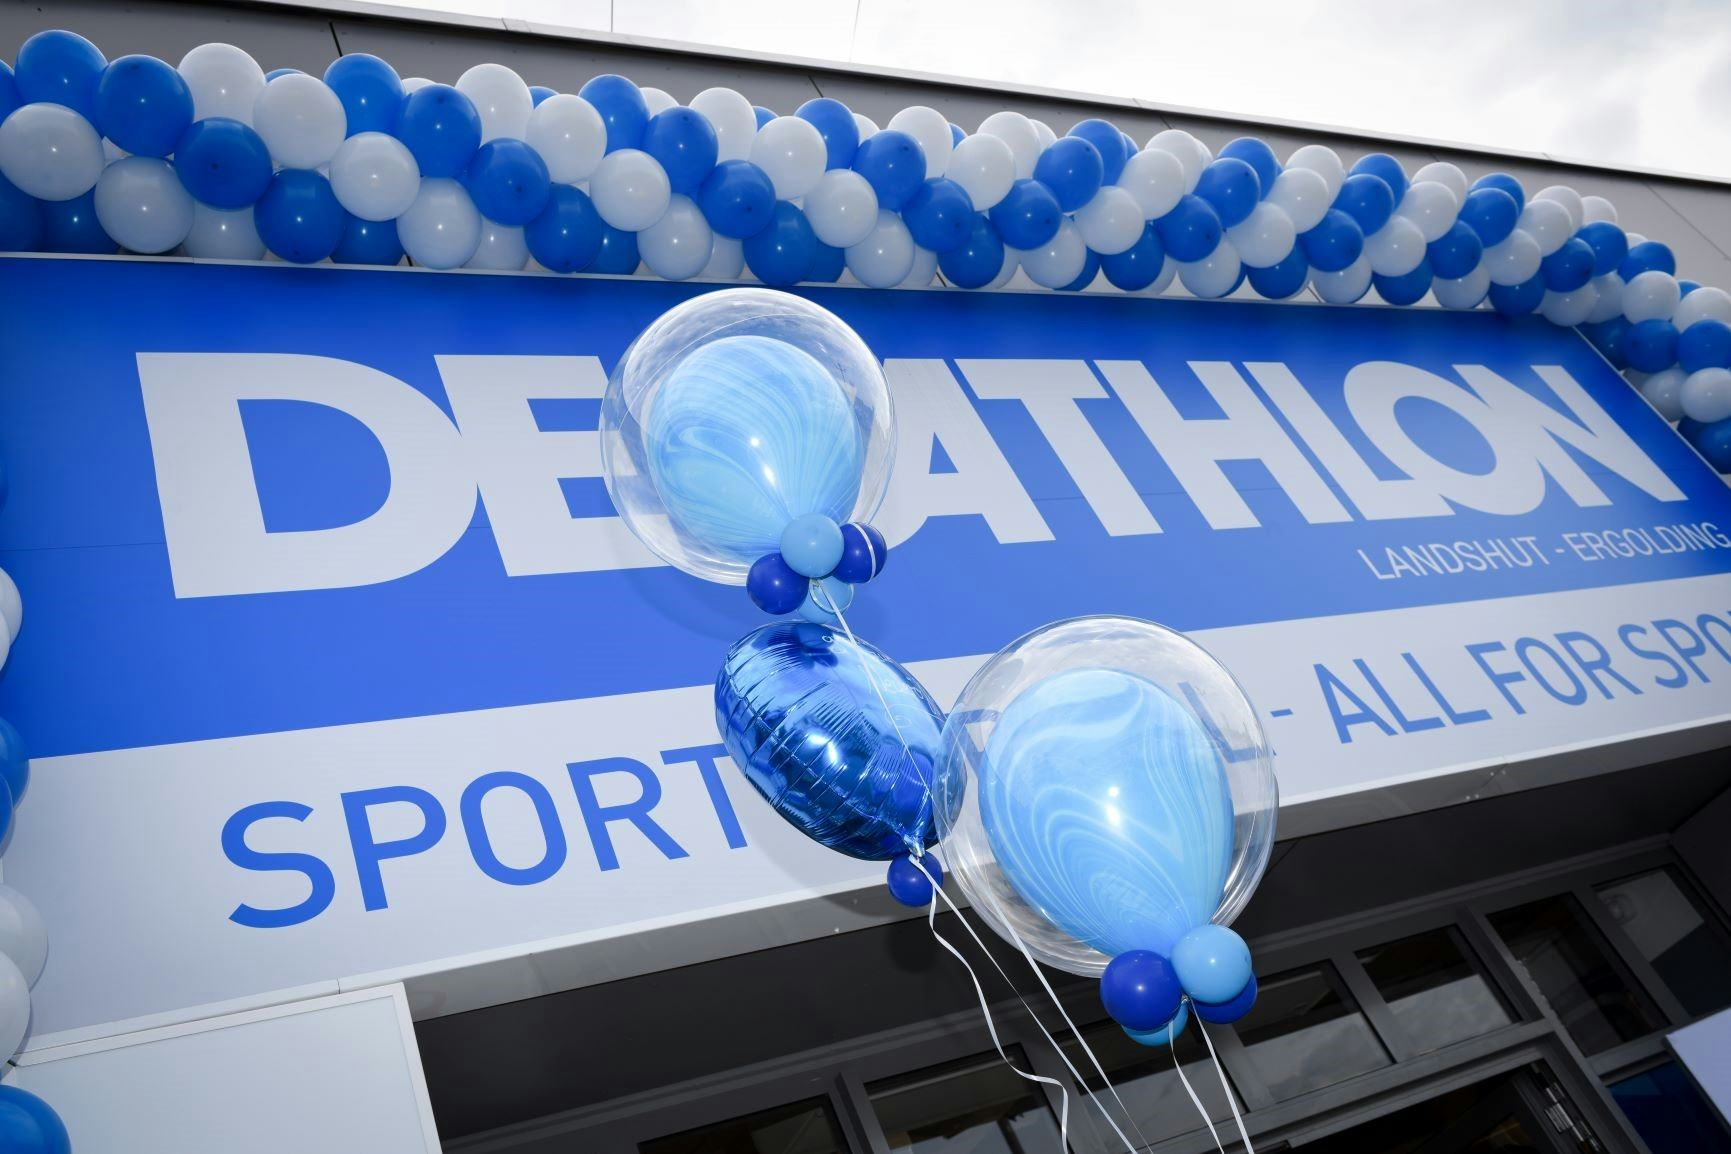 The success of Decathlon in southern Germany has led to plans for new store openings in 2021. - Photo Decathlon 